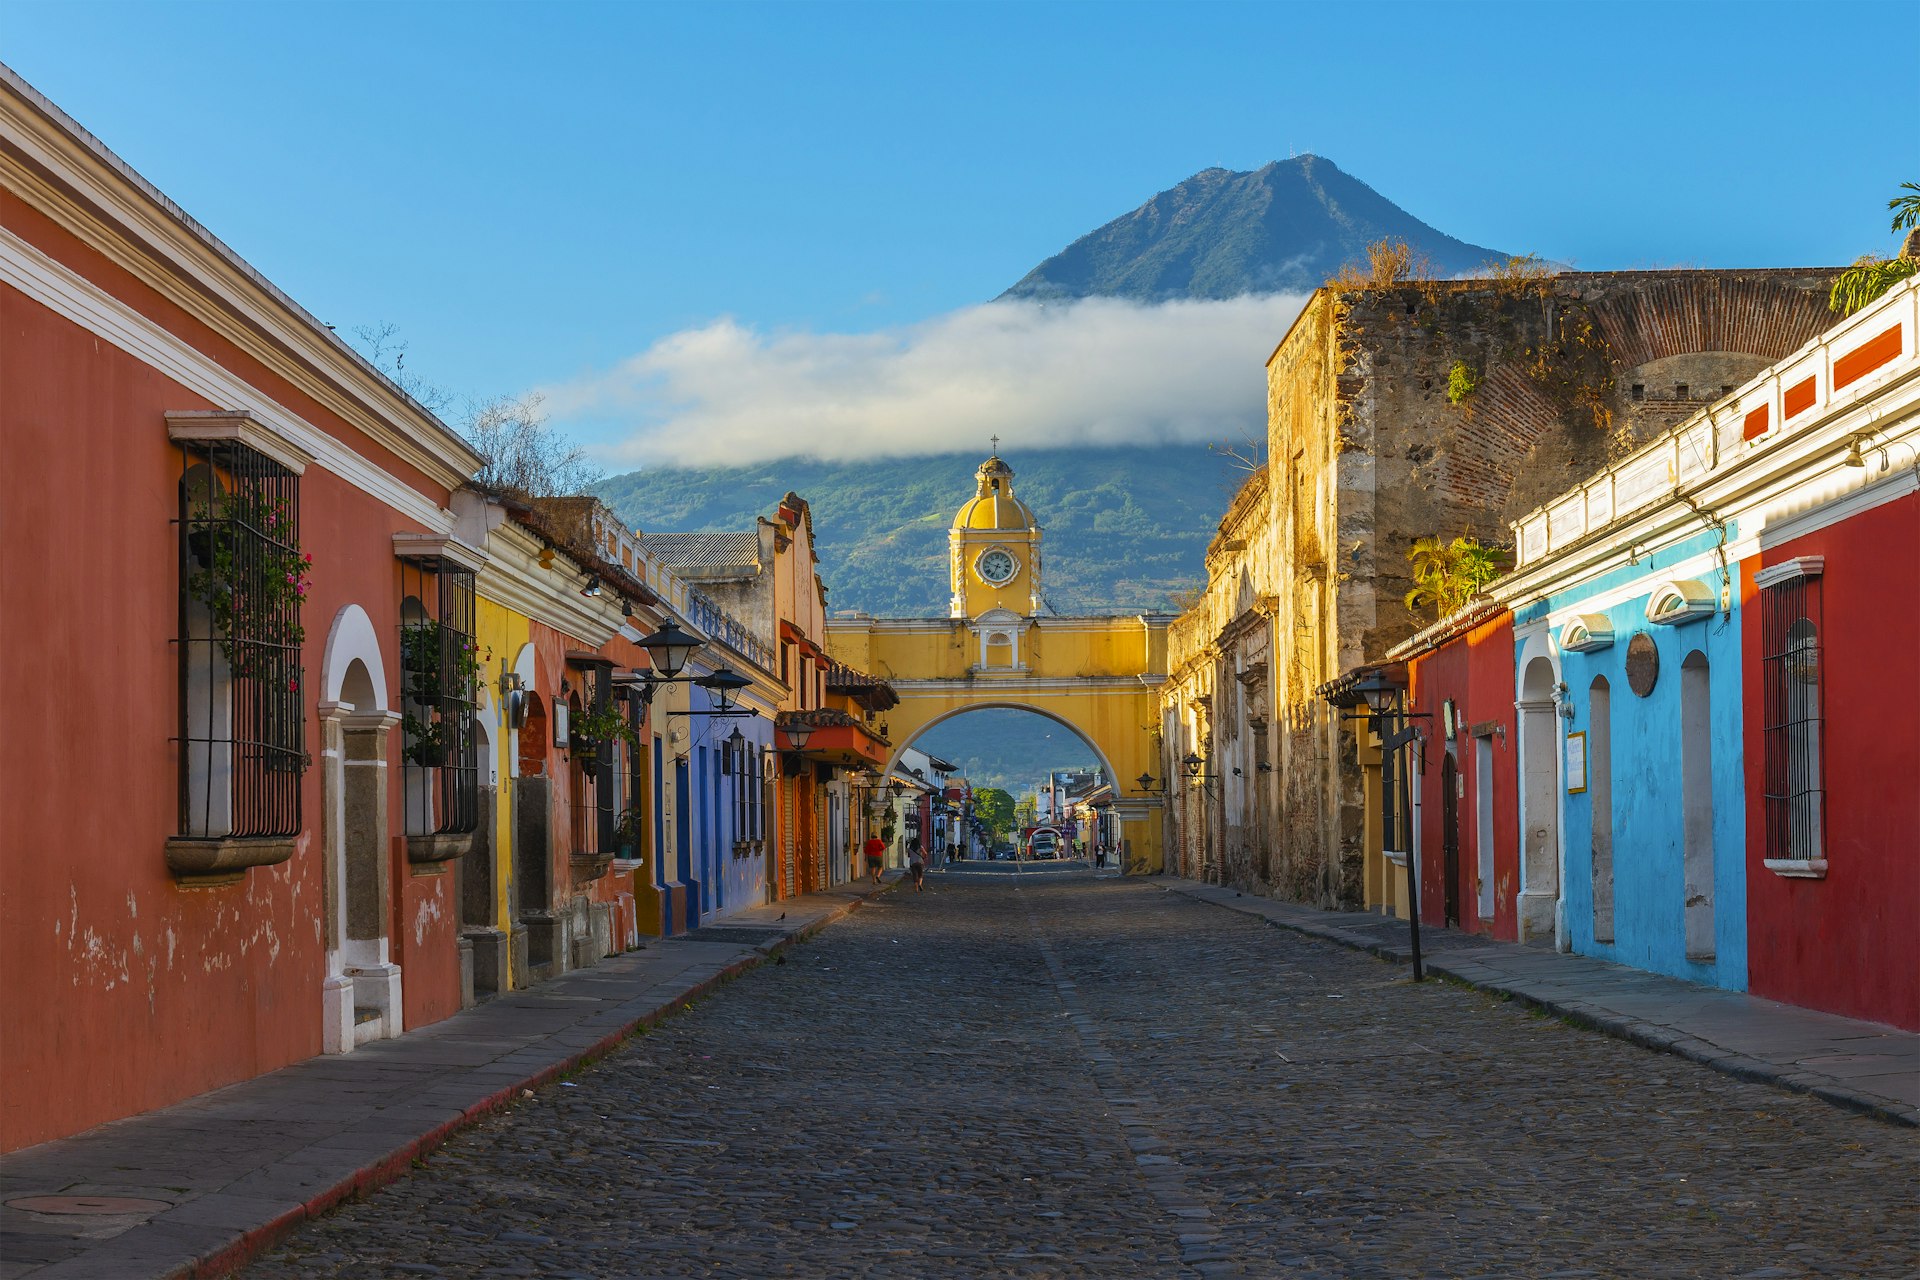 A cobbled street lined with colorful painted low-rise properties. A yellow arch with a clock on the top rises over the street. A large mountain covered with cloud looms over the town